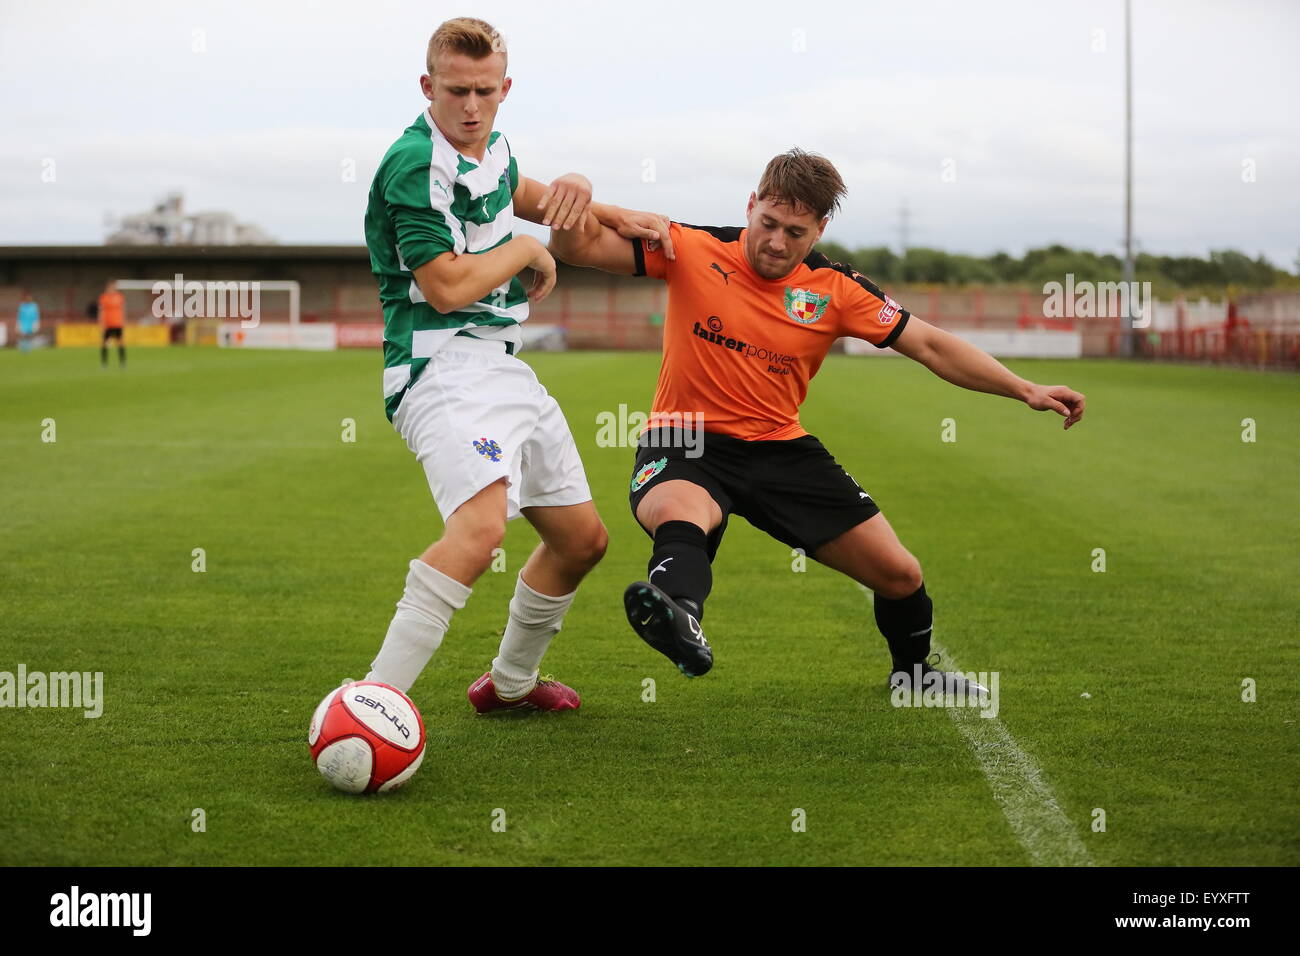 Northwich, Cheshire, UK. 4th August, 2015. Northwich Victoria beat Nantwich Town 2-0 in a pre season friendly held at Witton Albion's Wincham Park in Northwich. Nantwich Town's PJ Hudson in a tackle with Northwich's Matthew Todd. Credit:  Simon Newbury/Alamy Live News Stock Photo